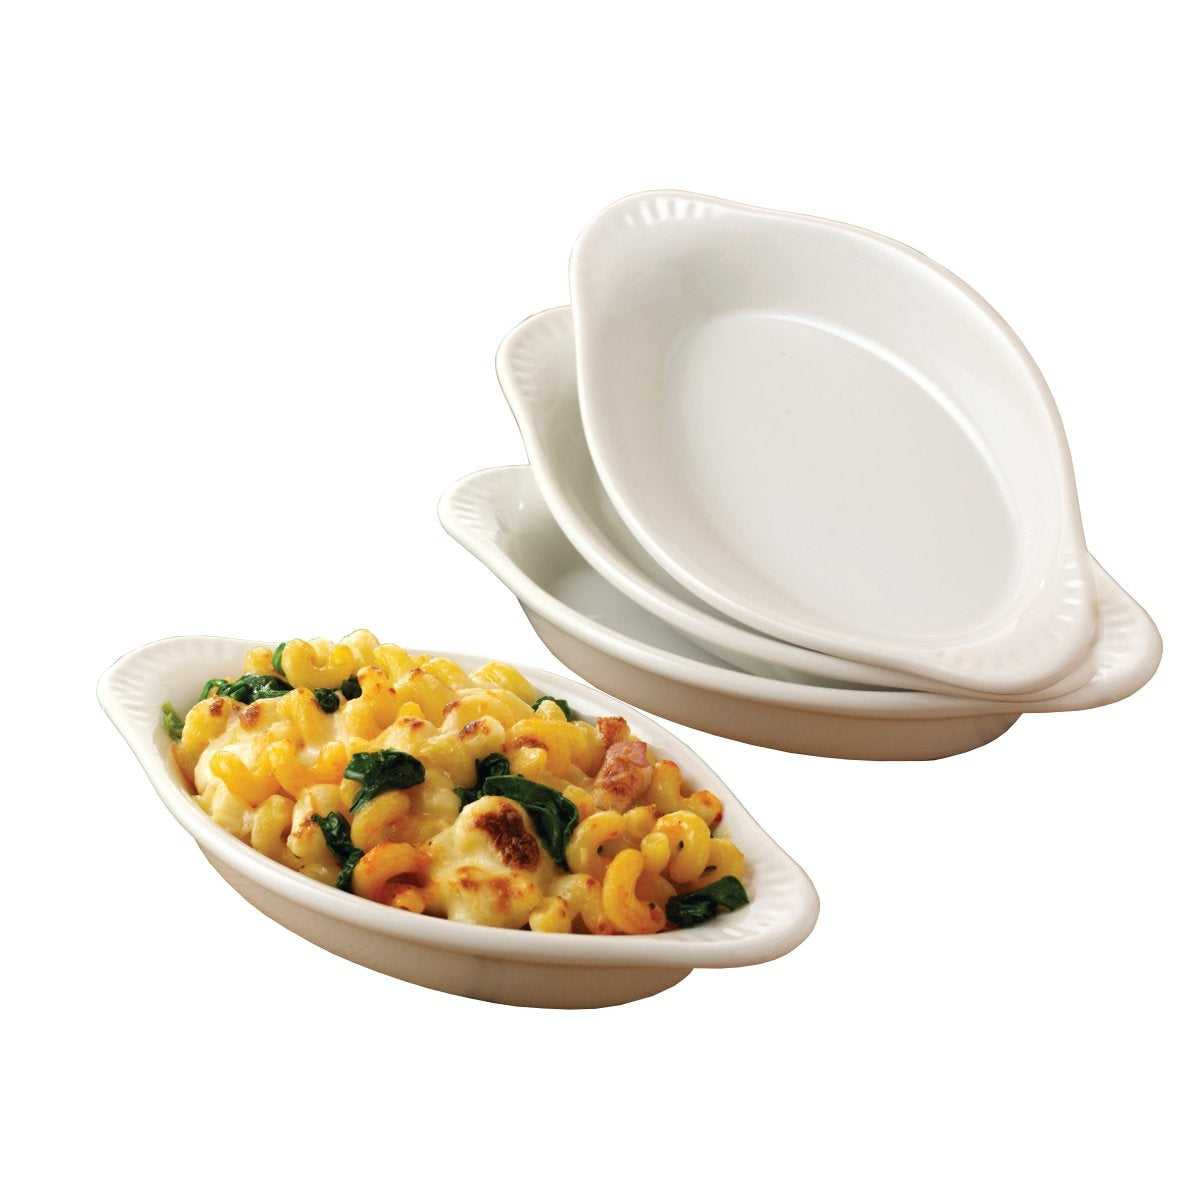 Classic Baking & Serving Dishes - Set of 4